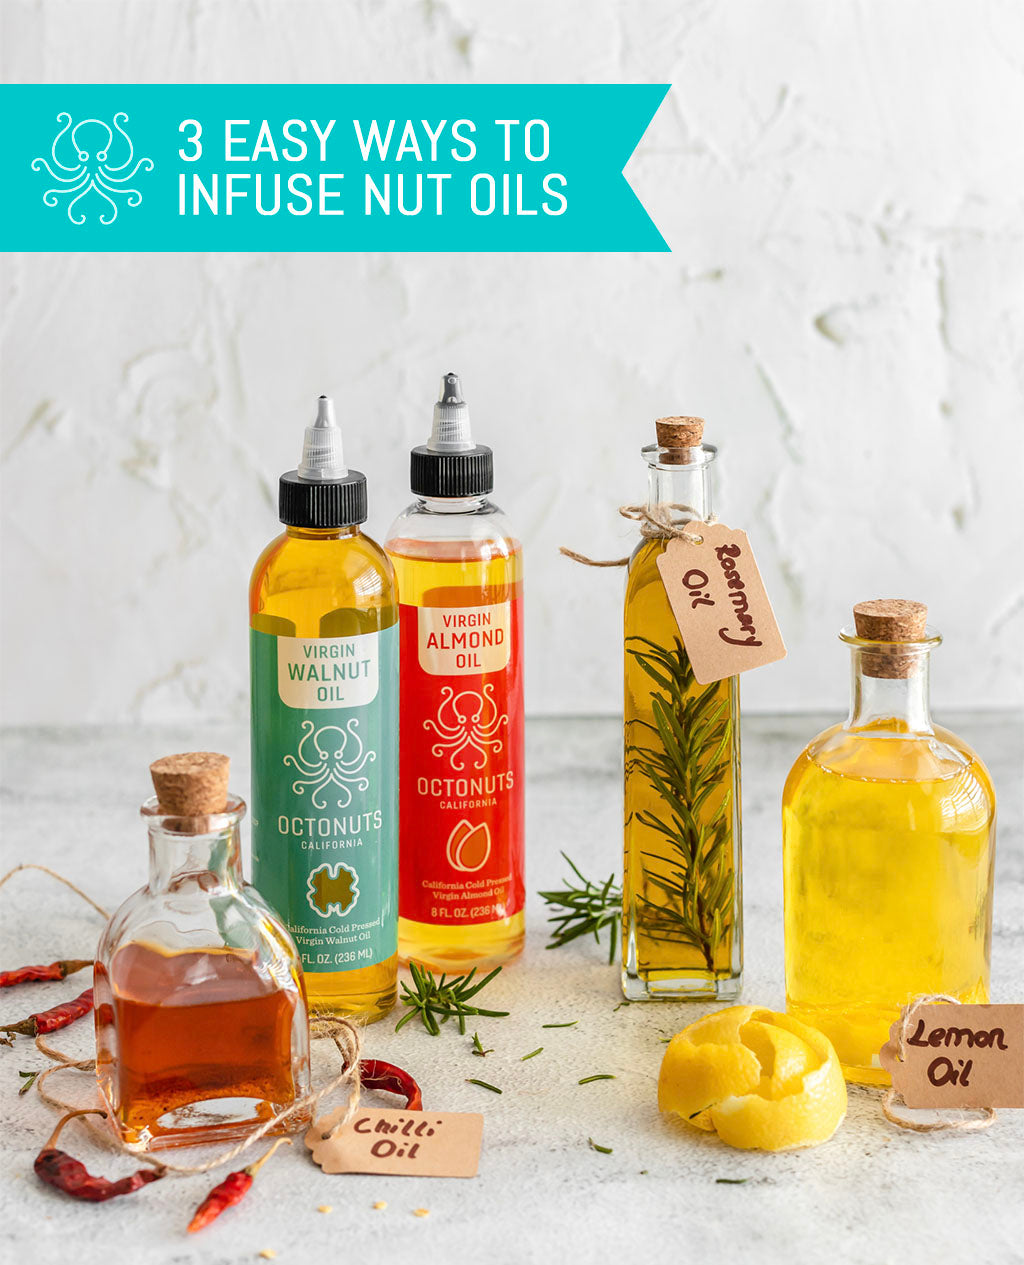 3 Easy Ways to Infuse Nut Oils